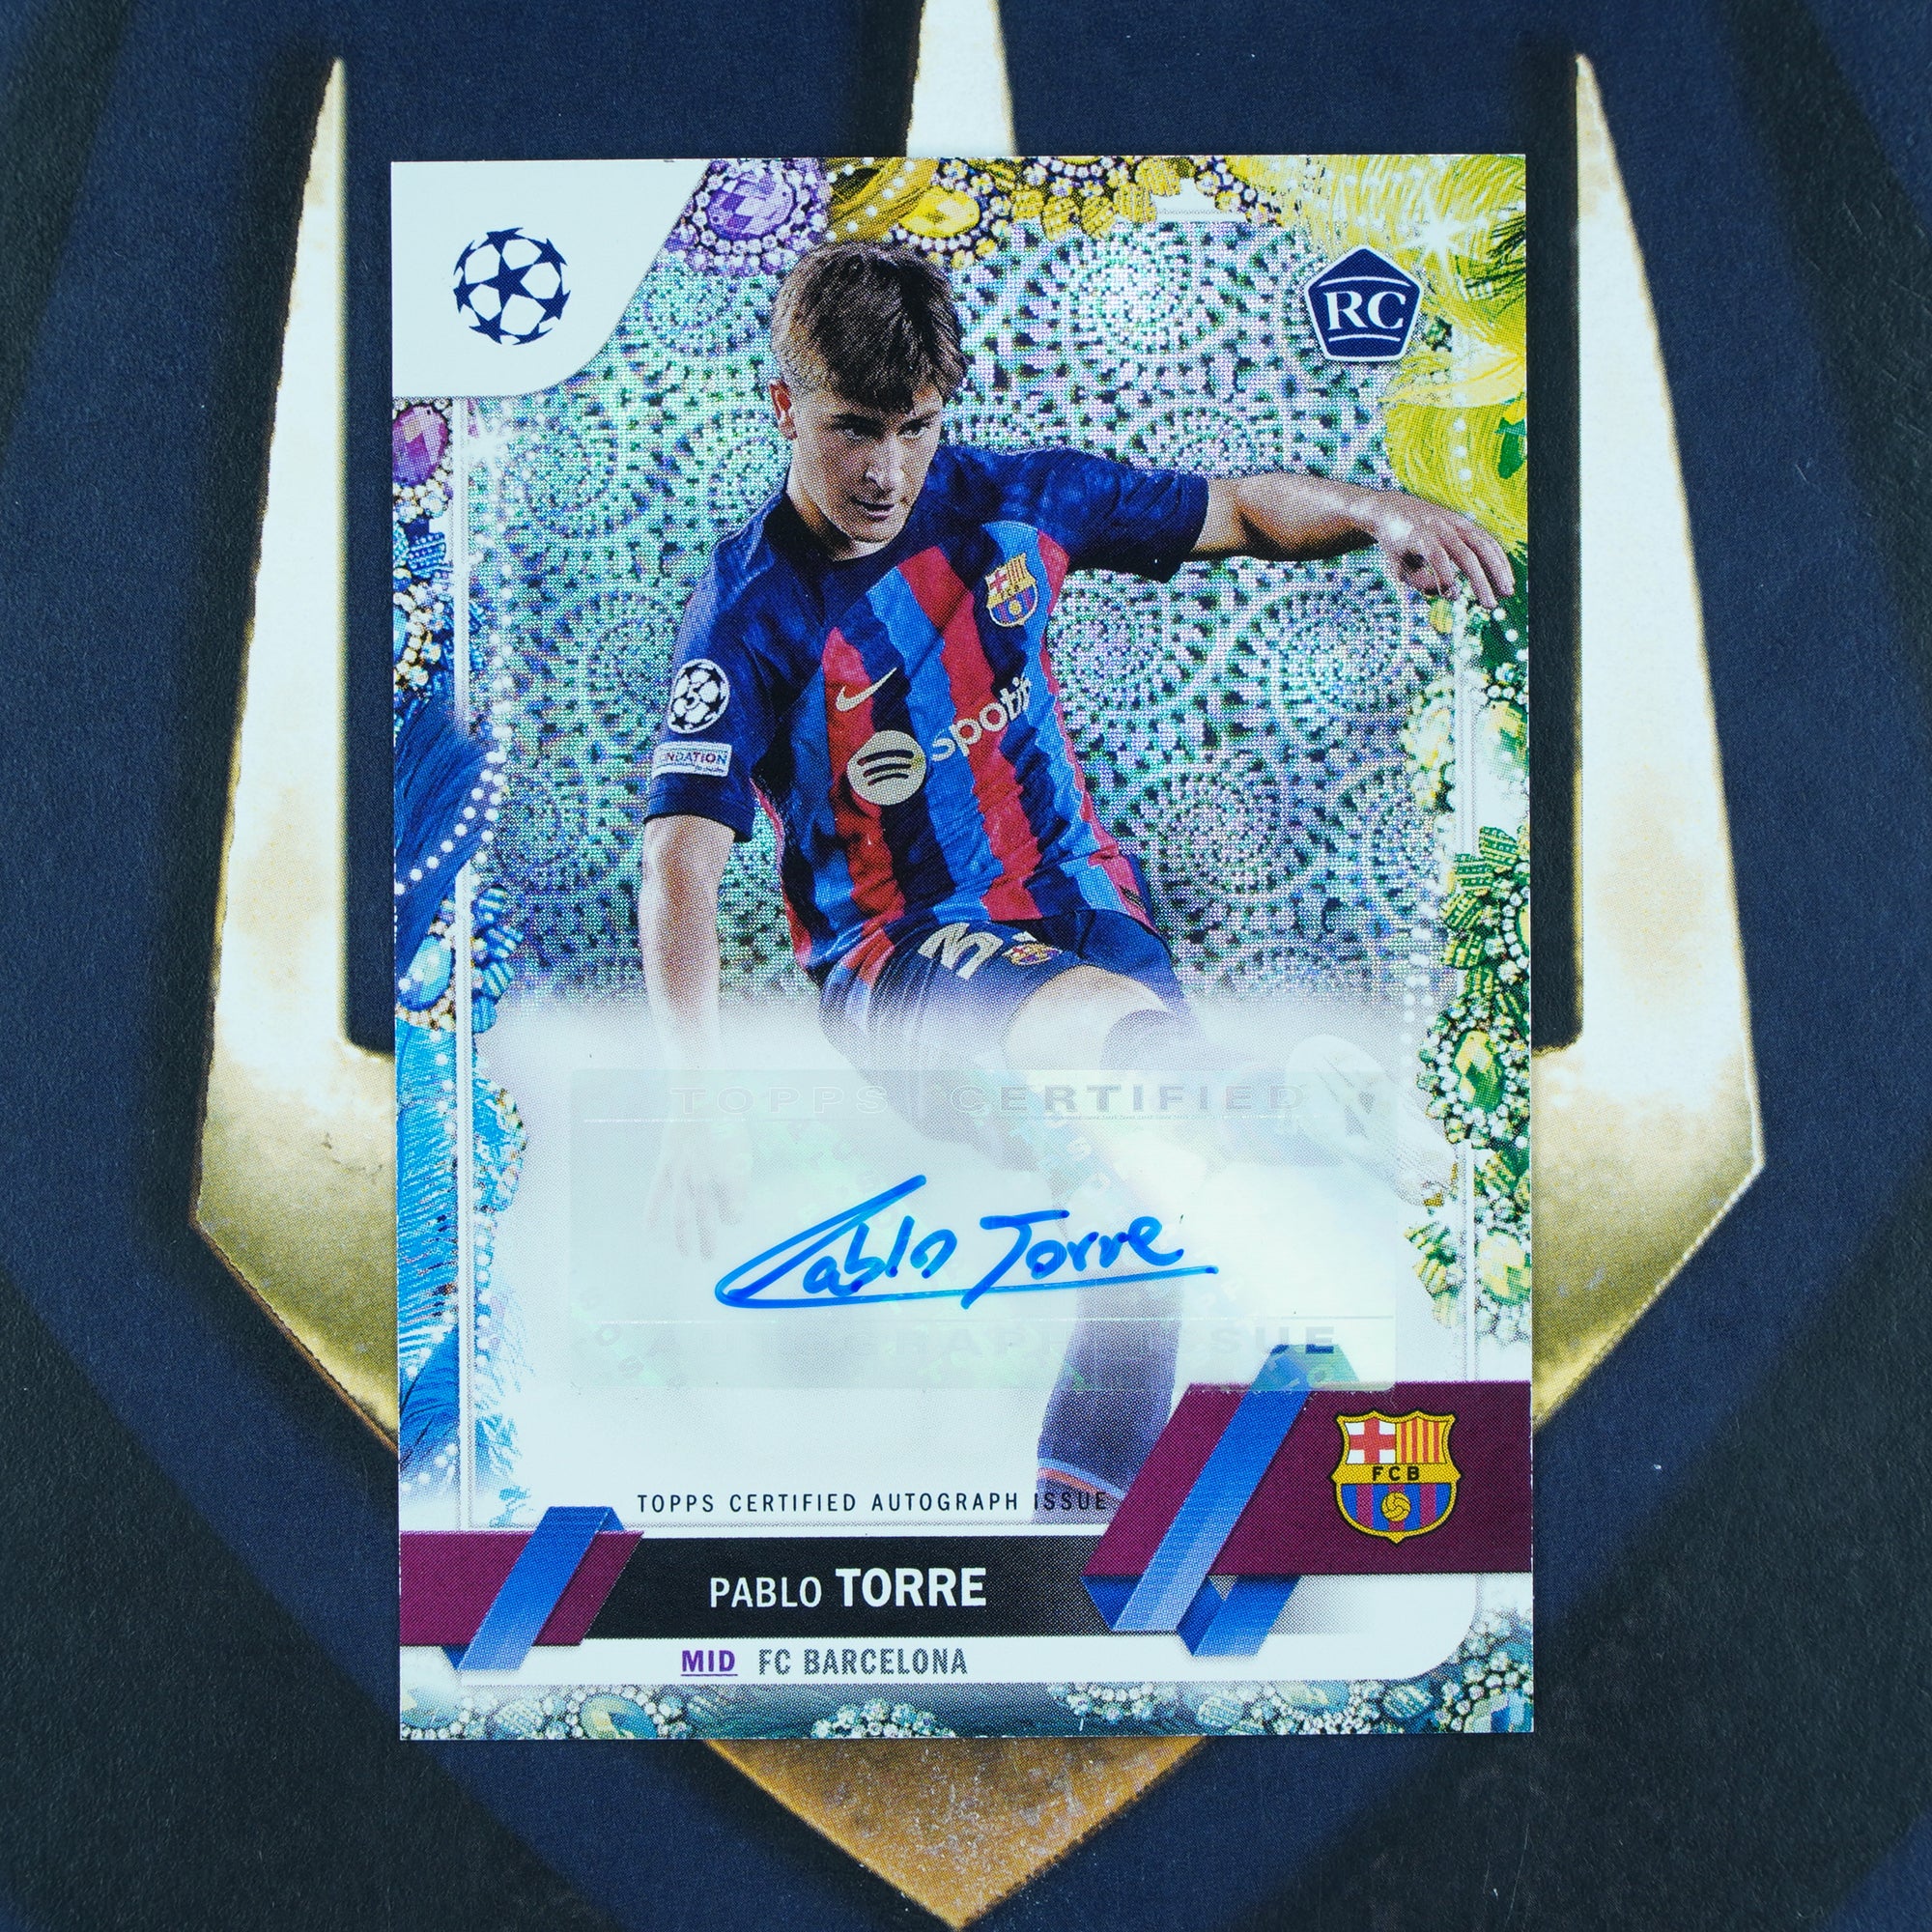 Pablo Torre  2022-23 Topps Carnaval  Base Auto  Barcelona  RC